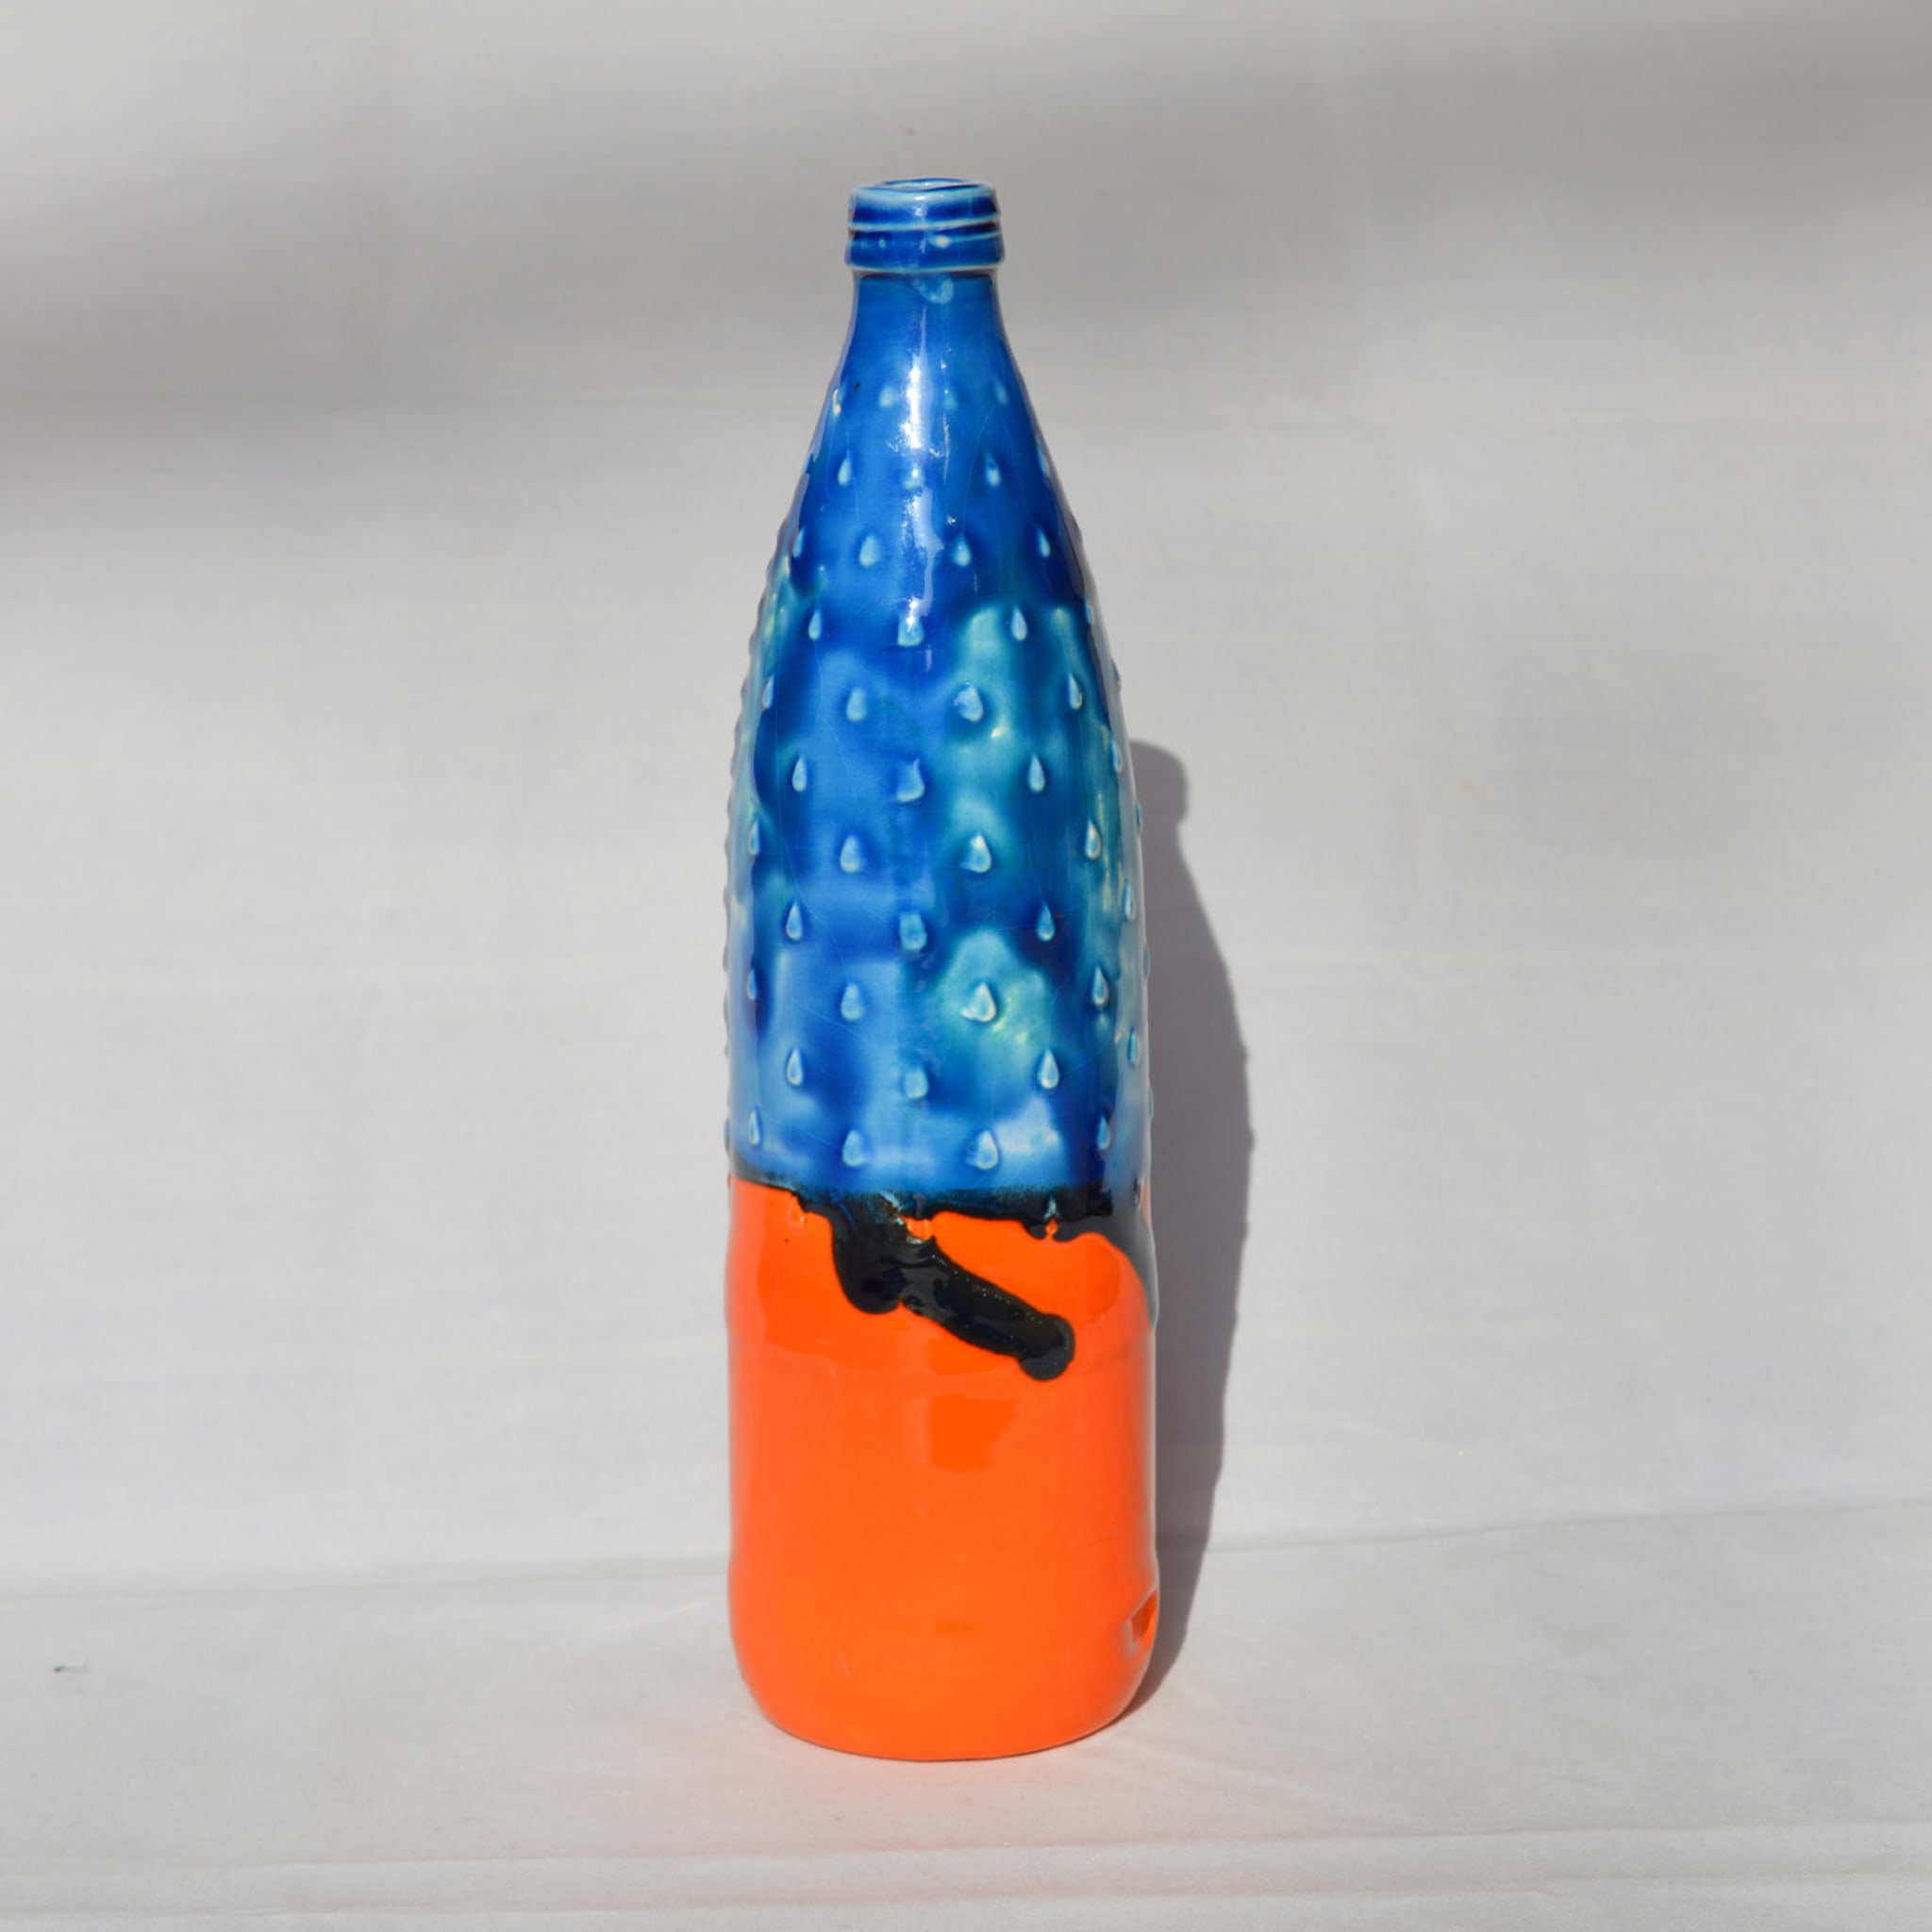 More Clay Less Plastic Blue and Orange Bottle - Alternative view 1